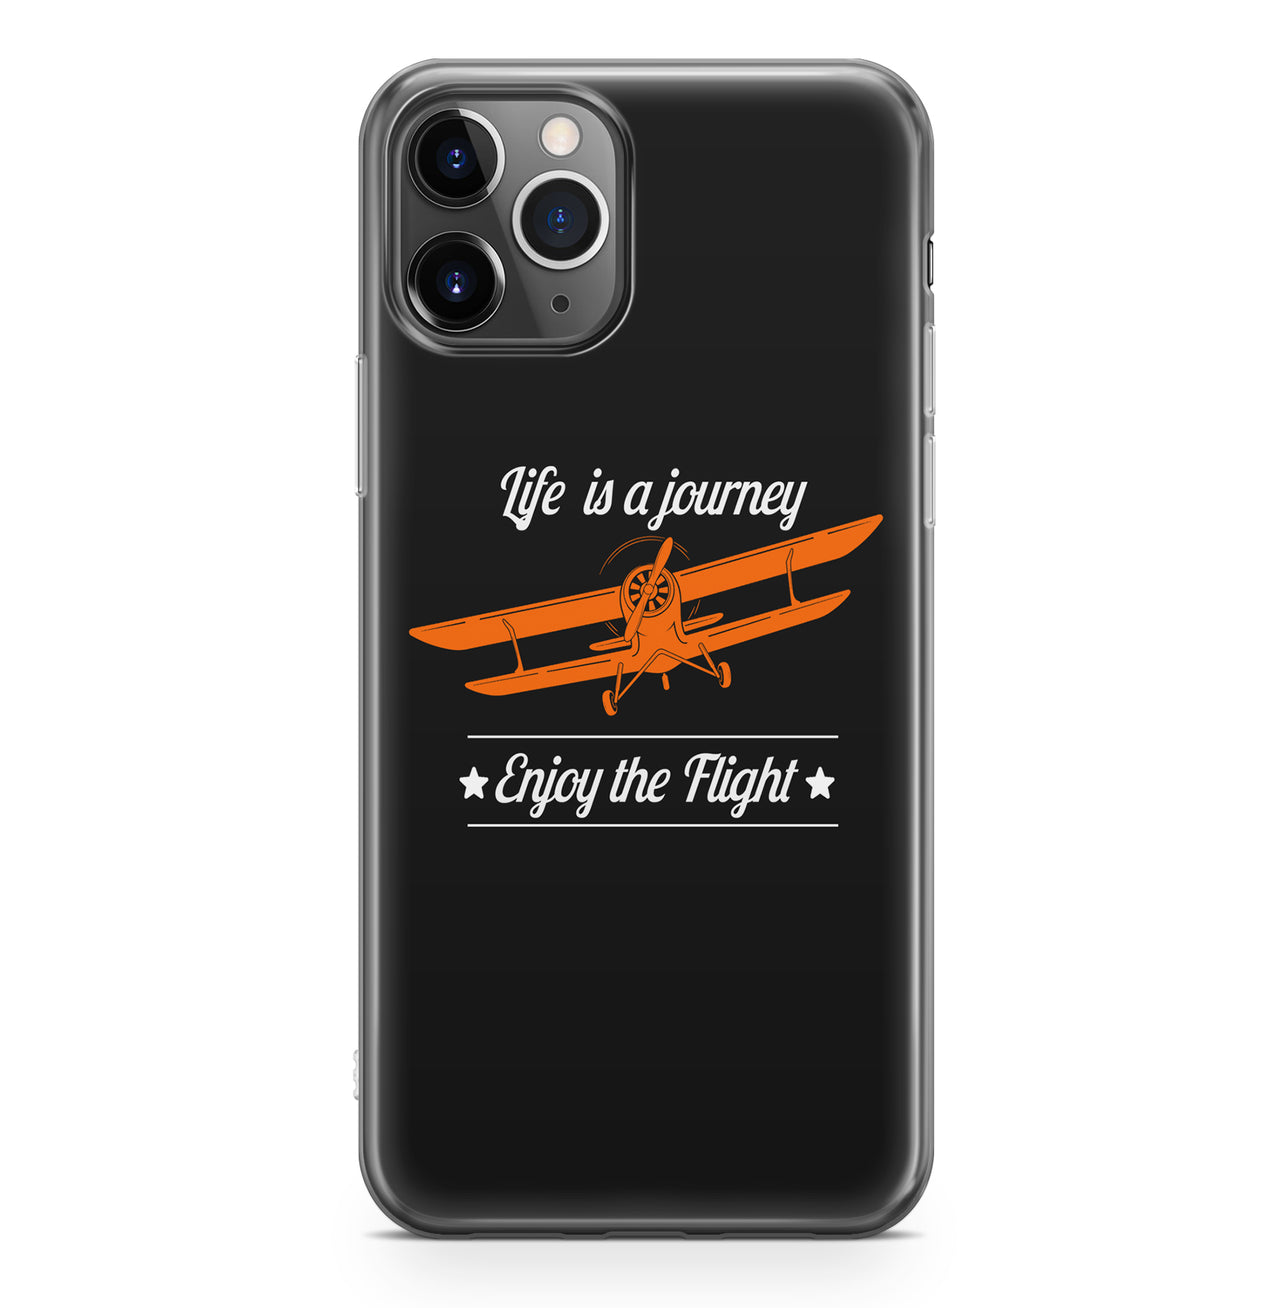 Life is a journey Enjoy the Flight Designed iPhone Cases